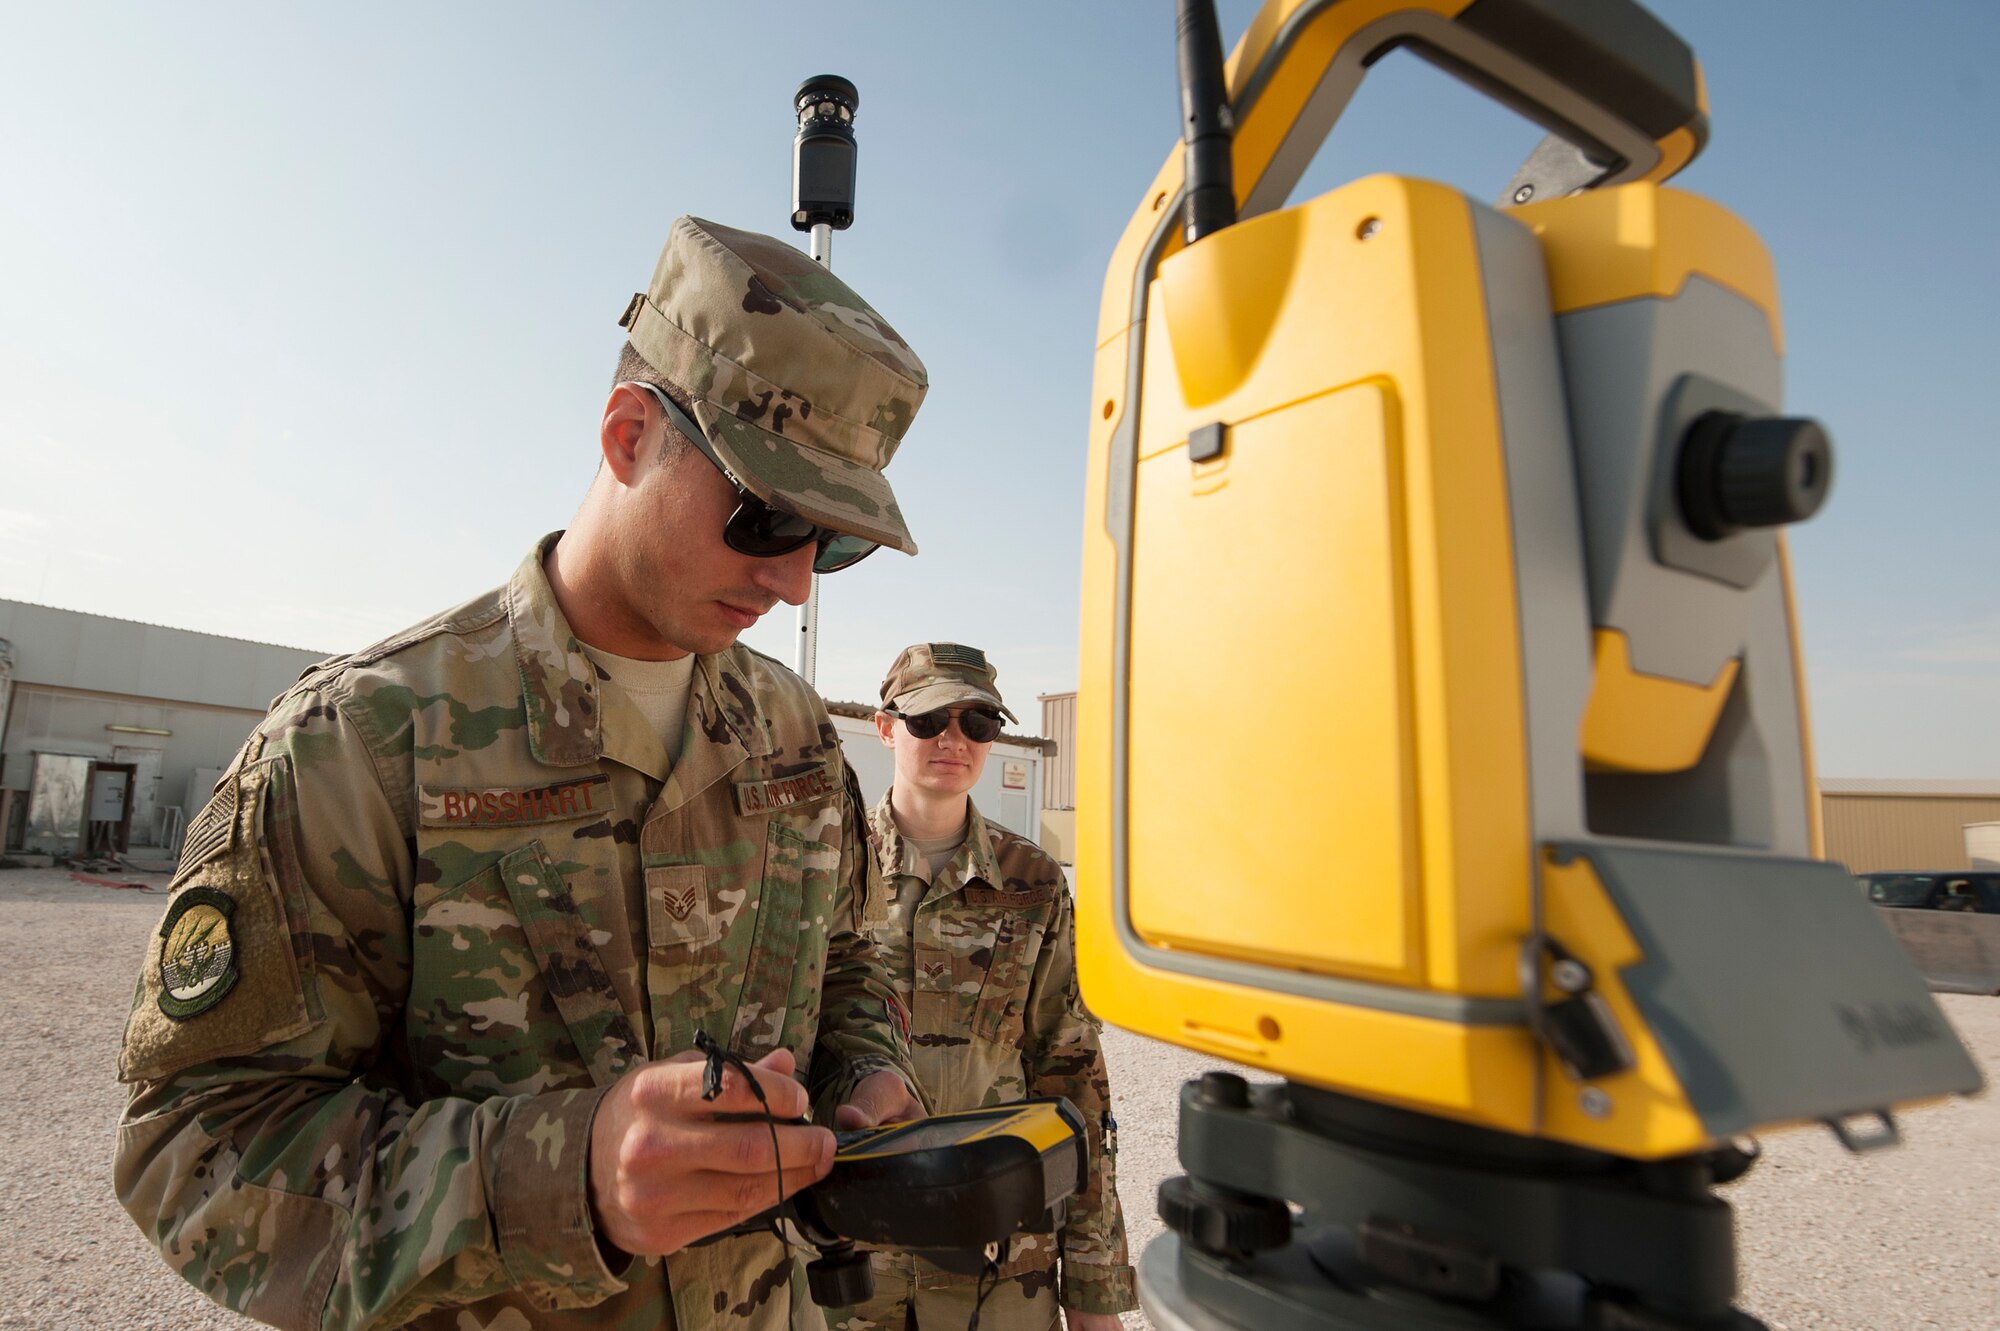 Staff Sgt. Arich Bosshart, 379th Expeditionary Civil Engineer Squadron geobase NCO in charge, and Senior Airman Jessica Kraus, 379th ECES geobase technician, conduct an operations check on GPS surveying equipment Dec. 11, 2018, at Al Udeid Air Base, Qatar. Bosshart and Kraus are responsible for creating and updating installation maps with the use of geospatial information system equipment and automated computer-aided design and drafting software. They also provide surveying support to construction that occurs on Al Udeid. (U.S. Air Force photo by Tech. Sgt. Christopher Hubenthal)